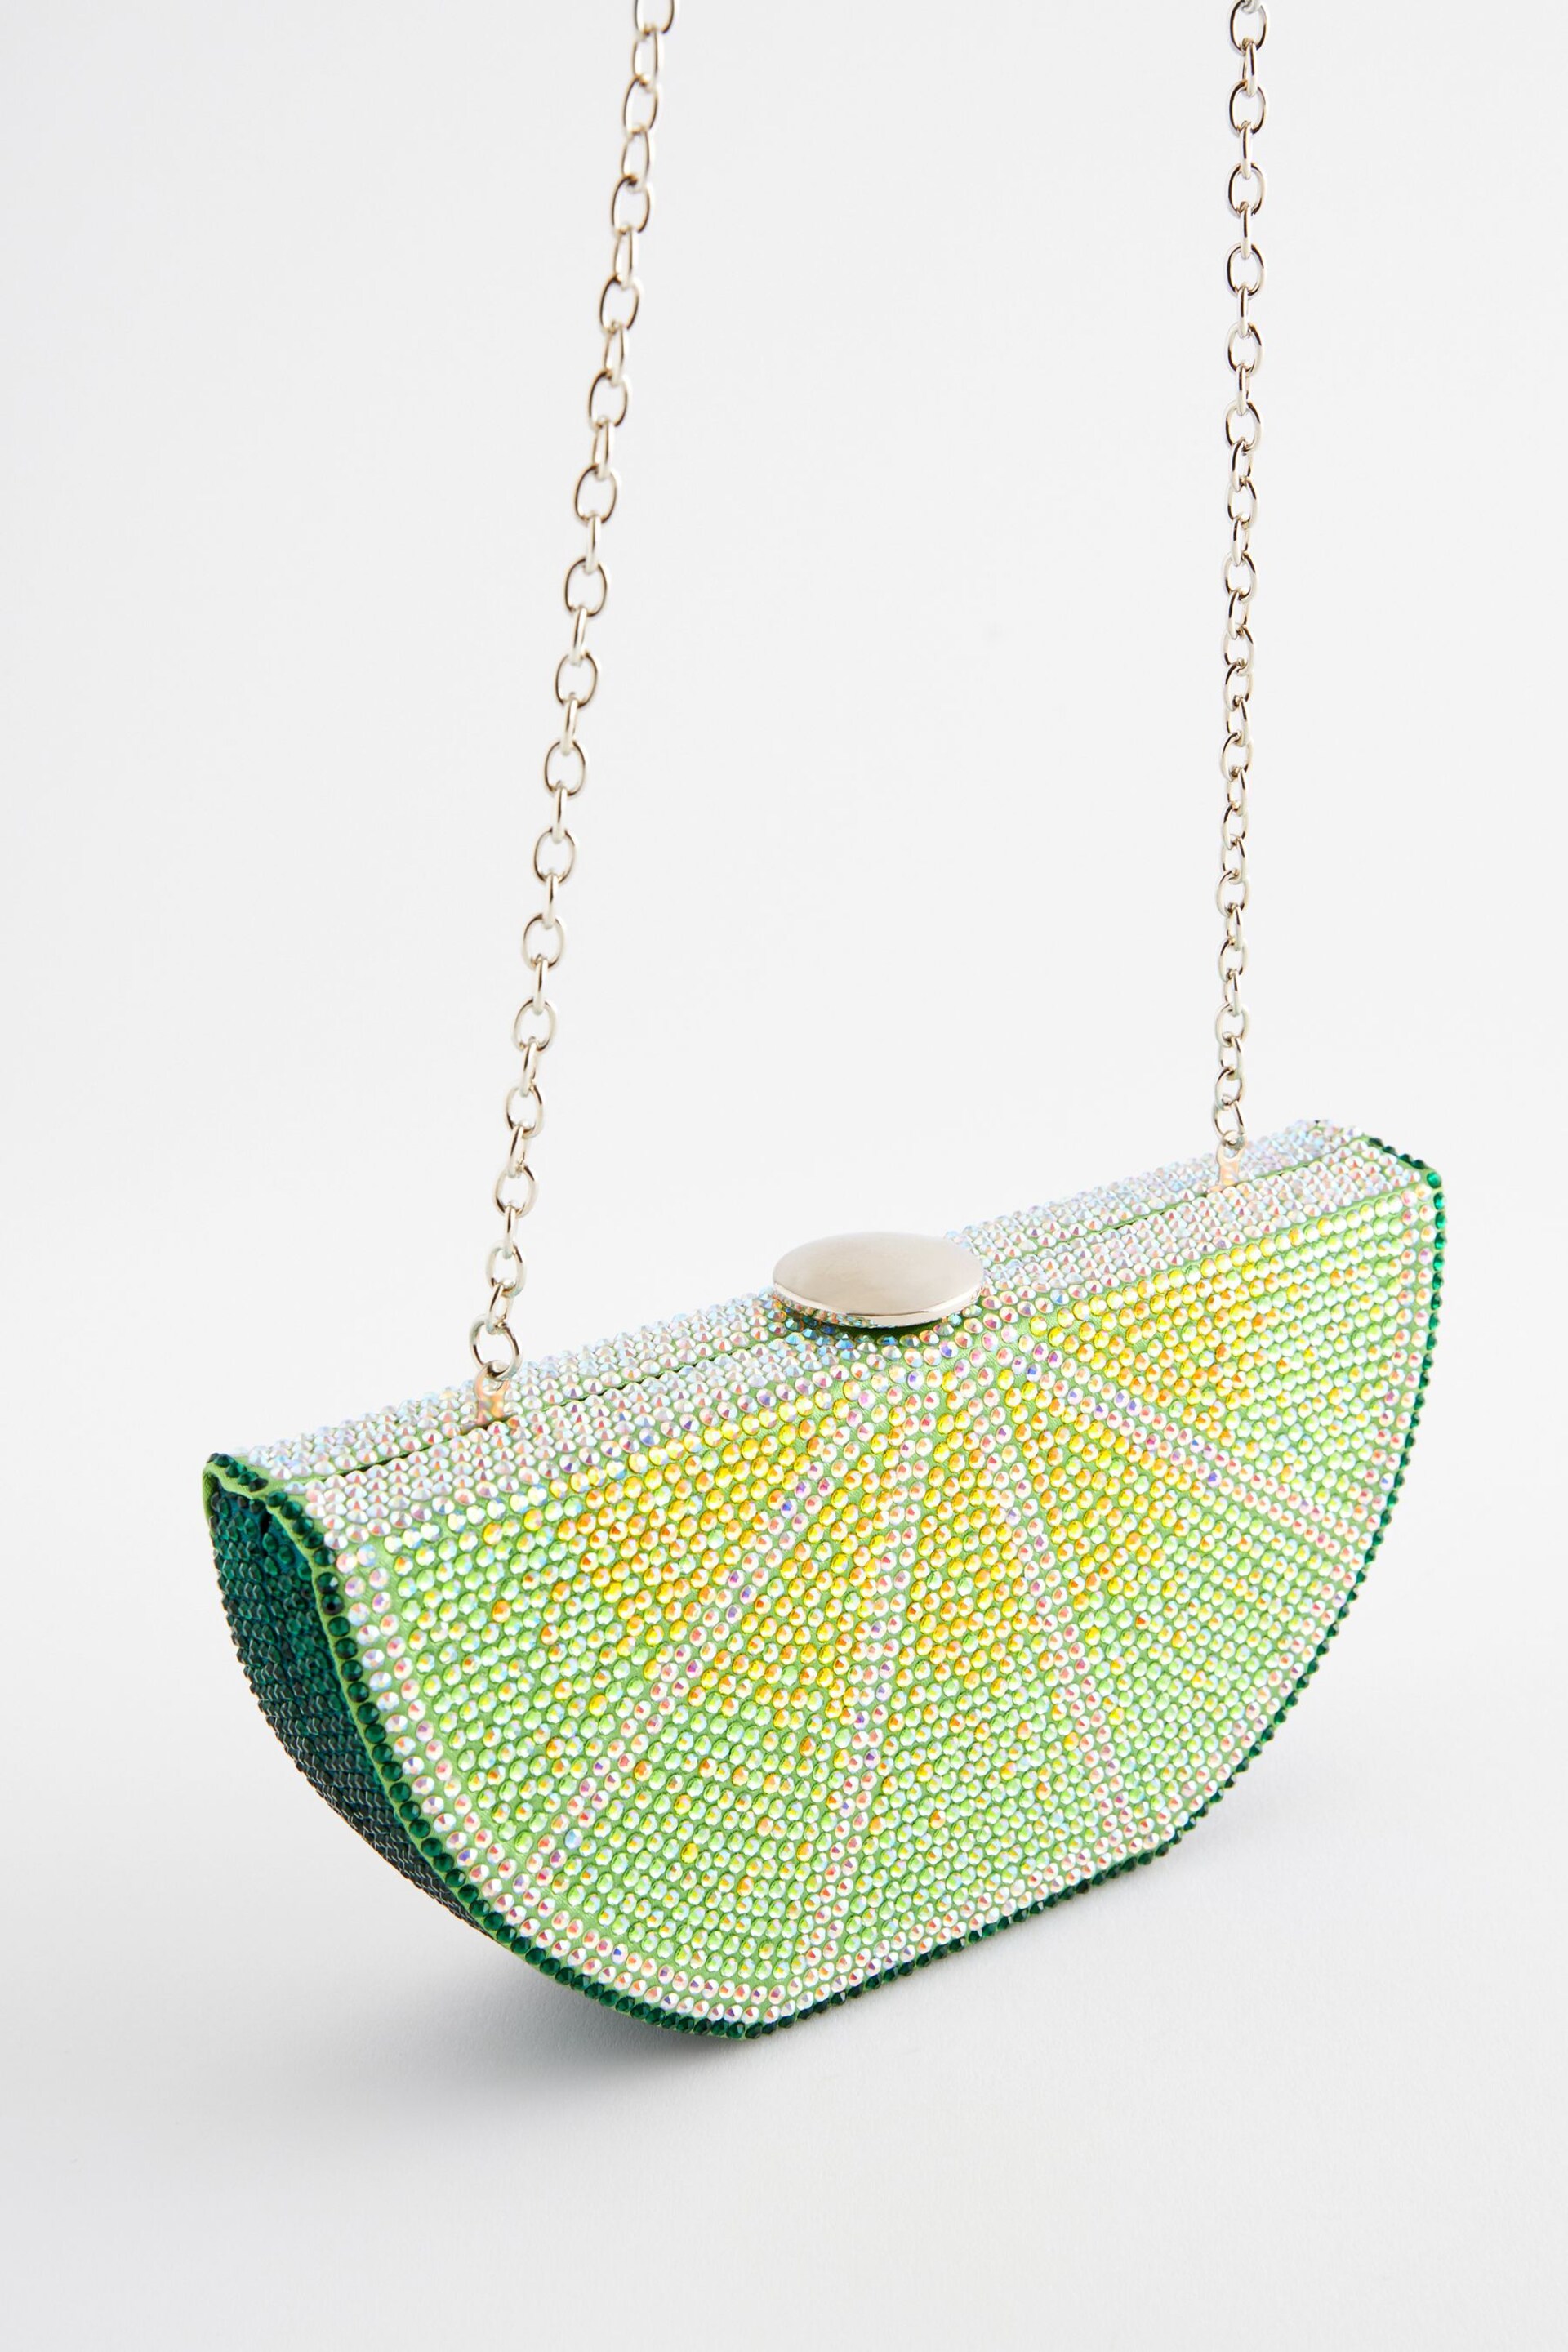 Lime Fruit Clutch - Image 4 of 5